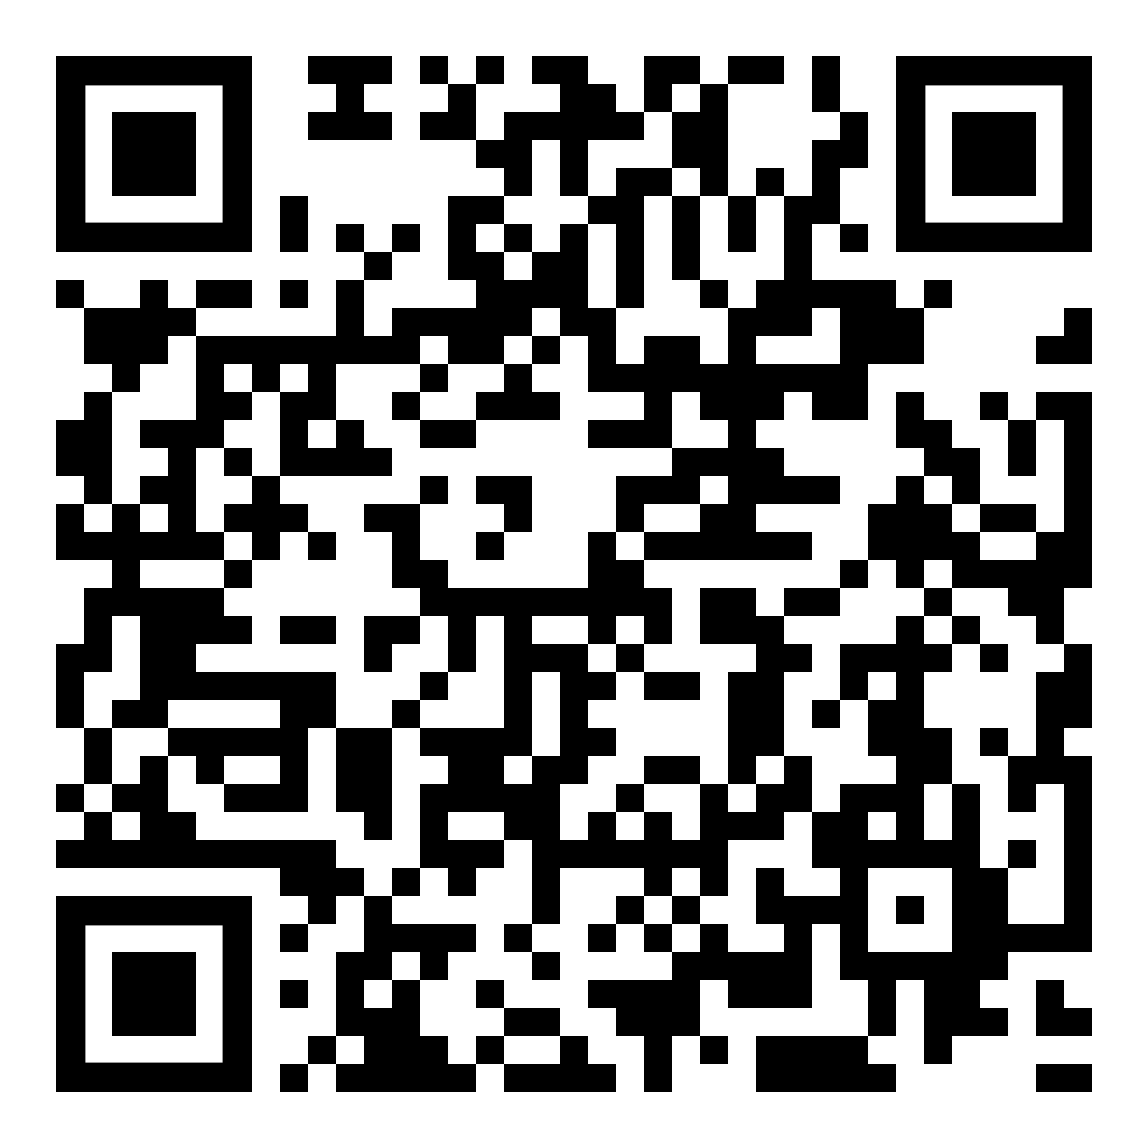 Hey @StElizabeth2013 #Panthers the OSSLT drop-in sessions are happening now during all lunches in the #LLC  Ask me any questions about your OSSLT prep booklet or about the test. Scan the QR code to be directed to the OSSLT practice test.